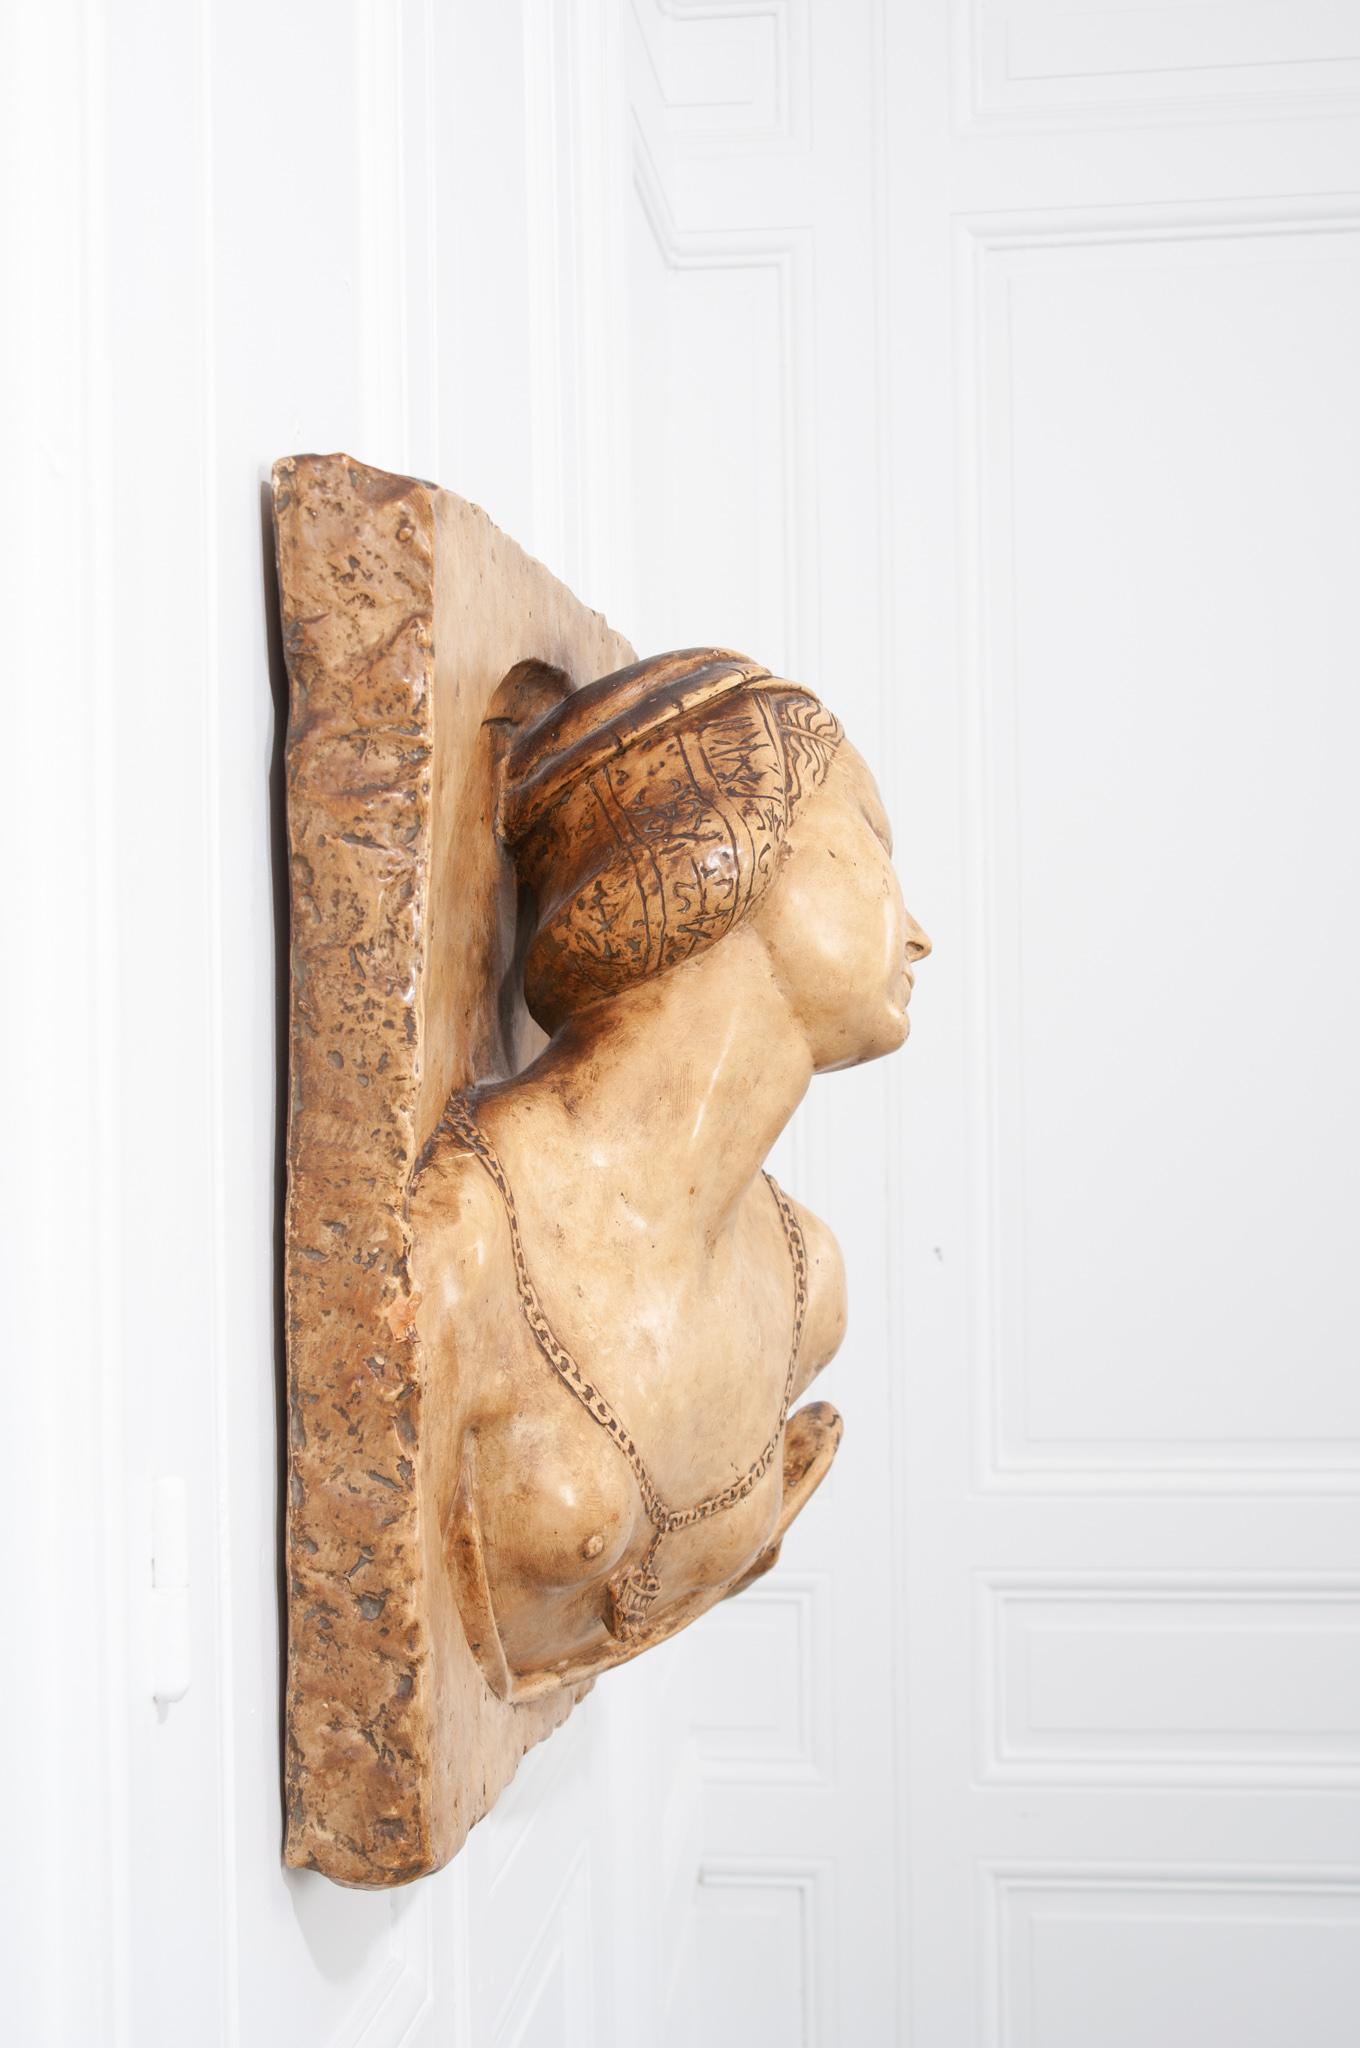 Stunning French 19th century plaster copy of lady from the Louvre, circa 1850. It has a small plaque on the back “Musee Du Louvre -Reproduction Interdite - Ateliers de Moulage.”